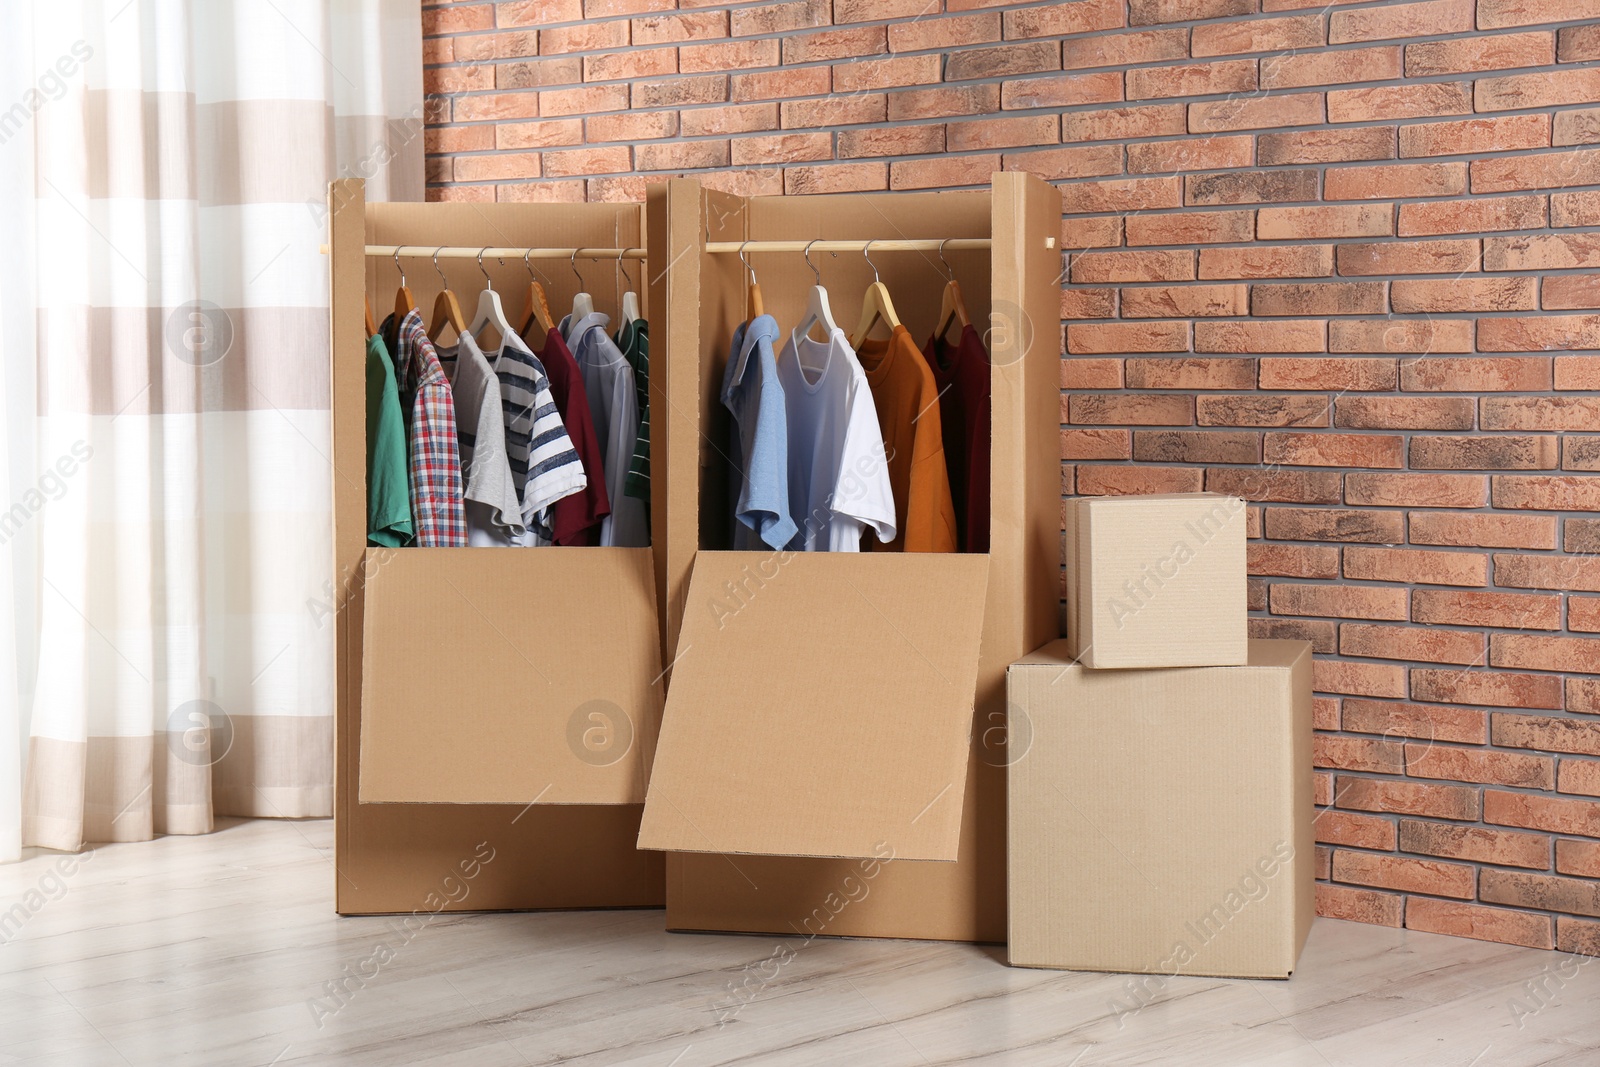 Photo of Wardrobe boxes with clothes against brick wall indoors